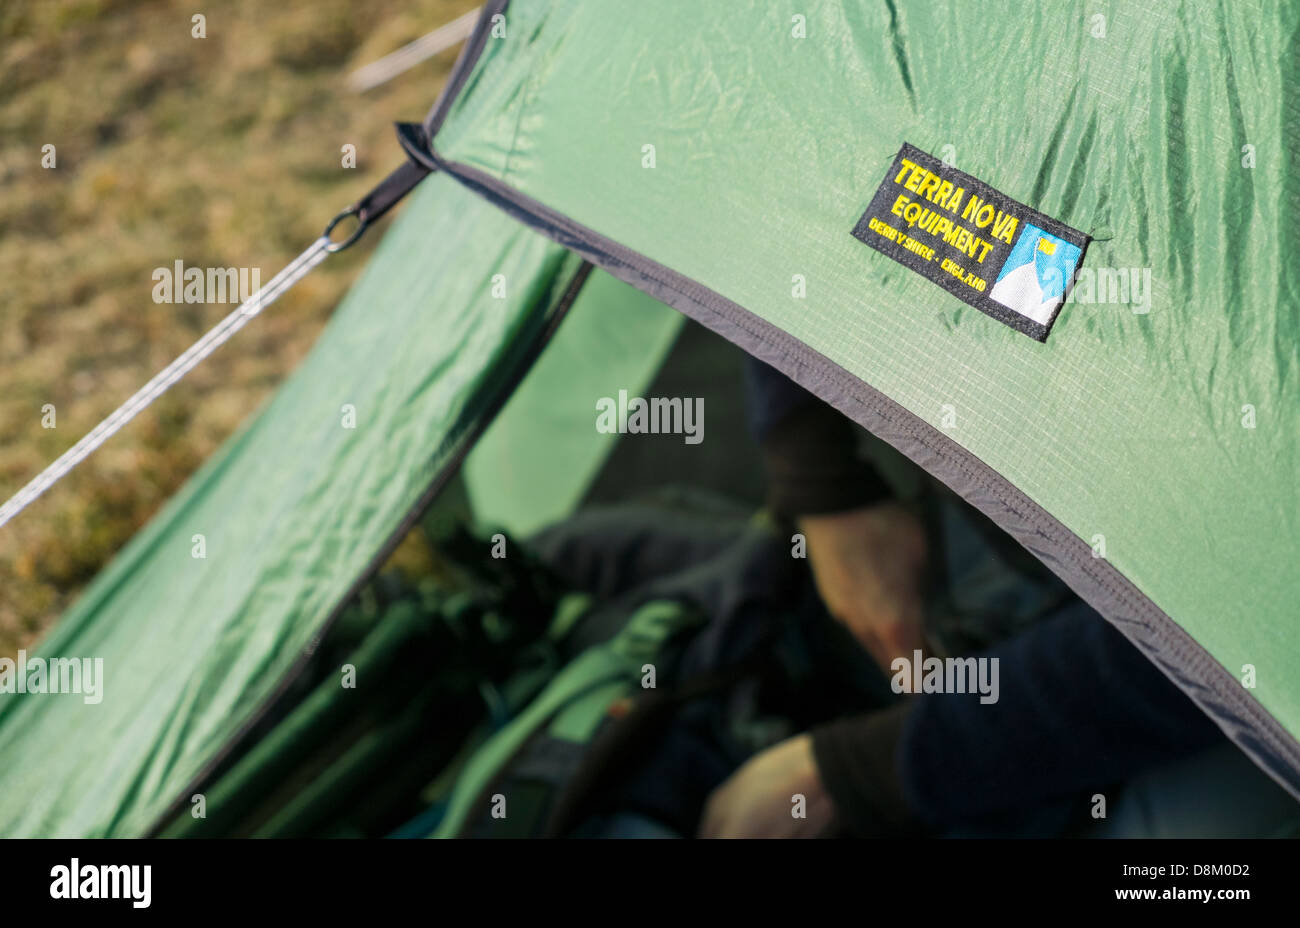 A close up of a Terra Nova Solar 2 tent pitched with hands packing a  backpack inside Stock Photo - Alamy